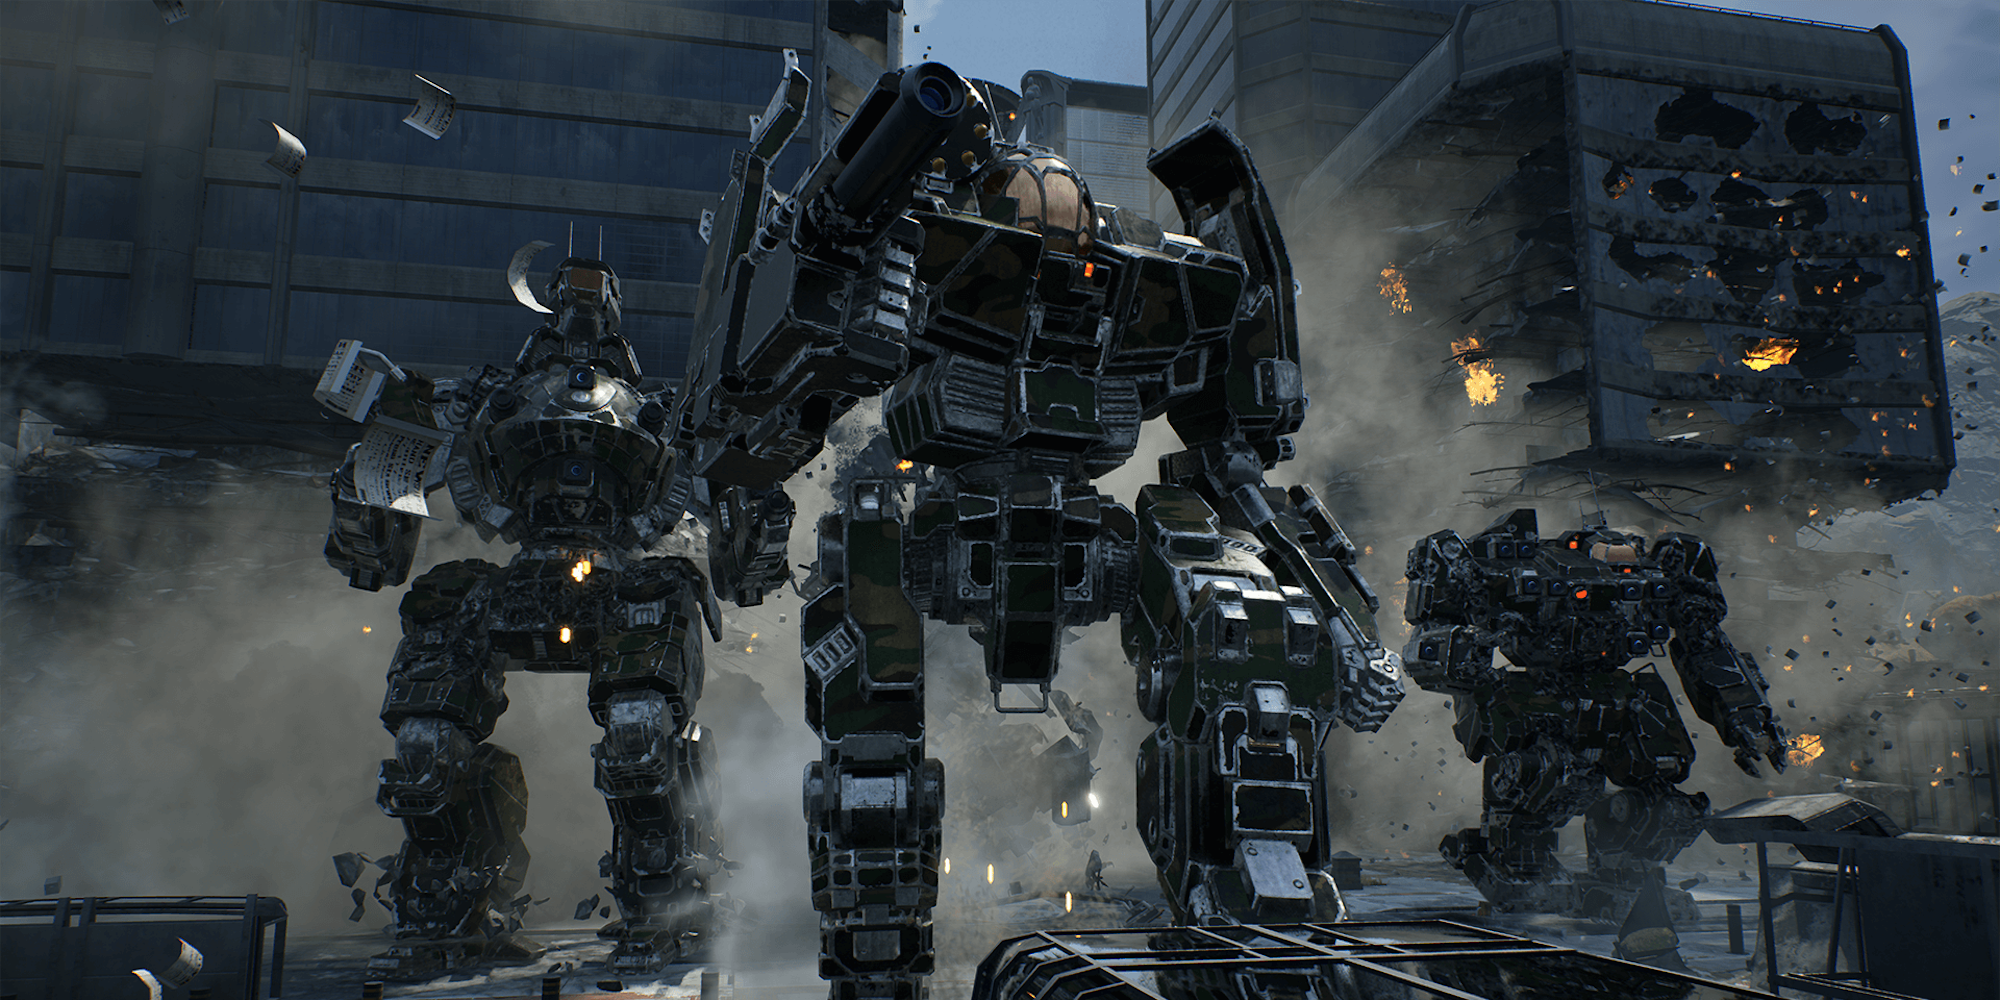 MechWarrior 5 update brings the game to Xbox